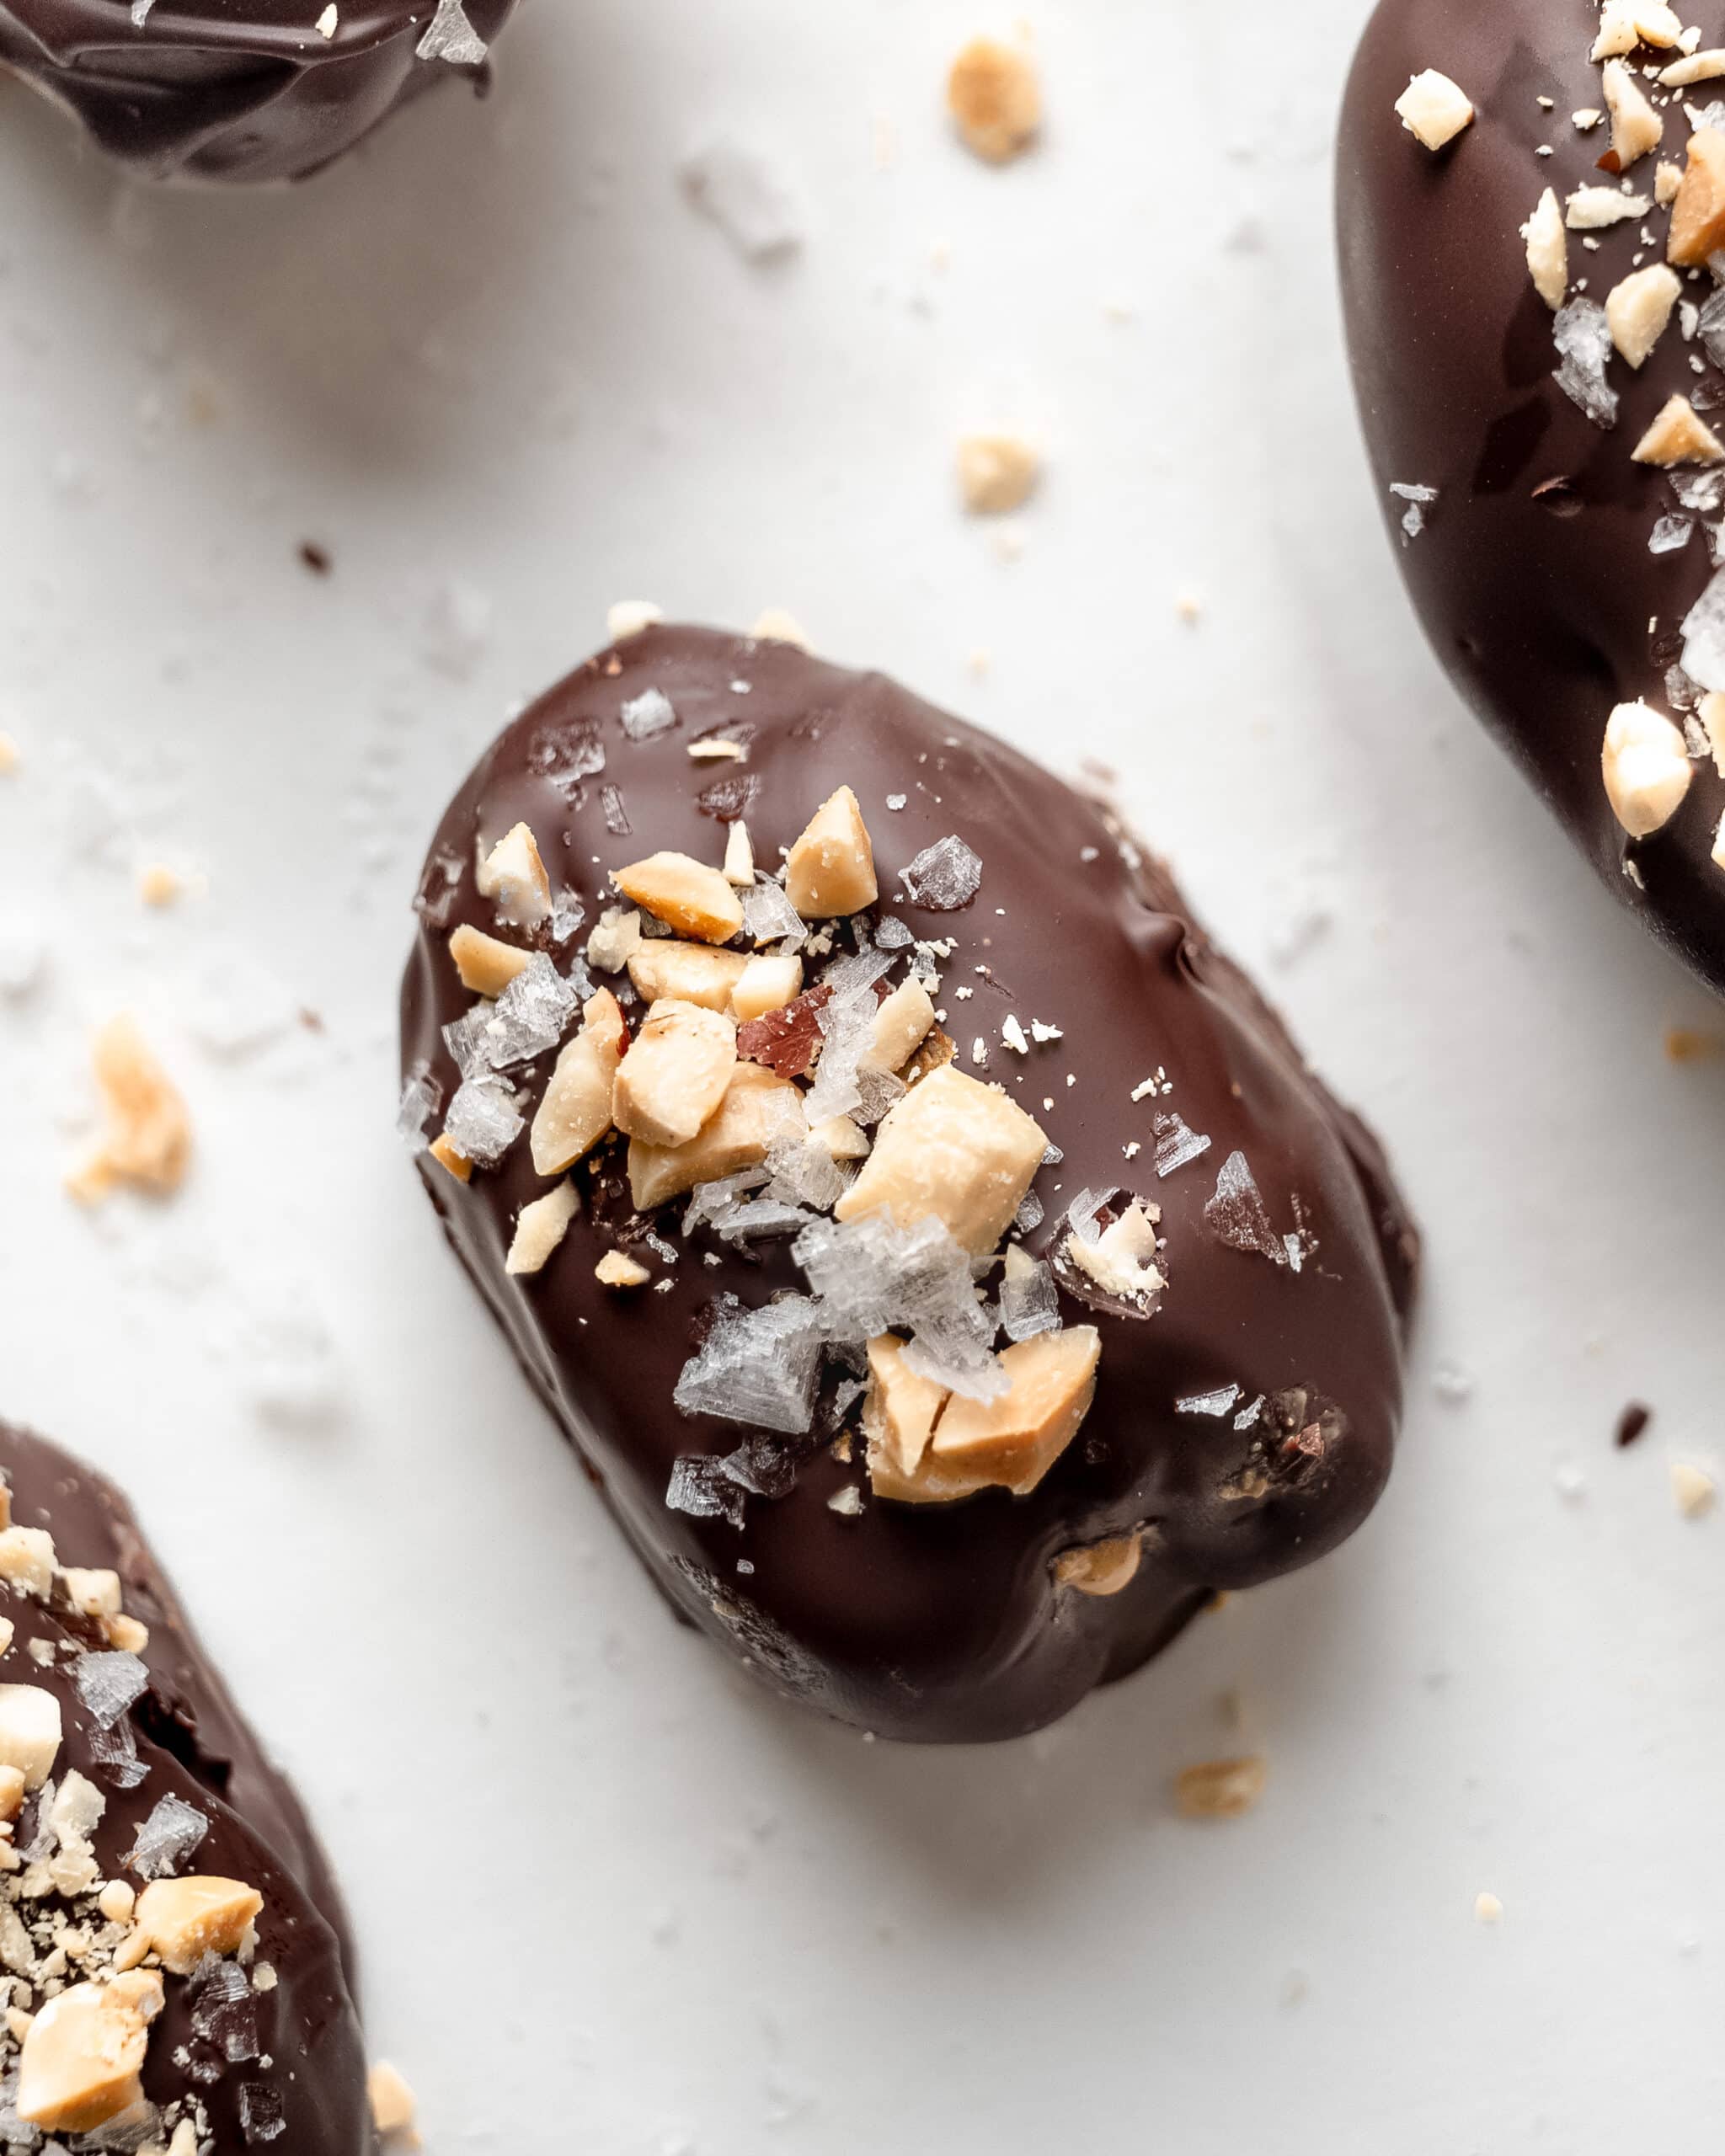 A close up view of a snickers date. Date covered in chocolate with chopped peanuts on top and flaky sea salt. 